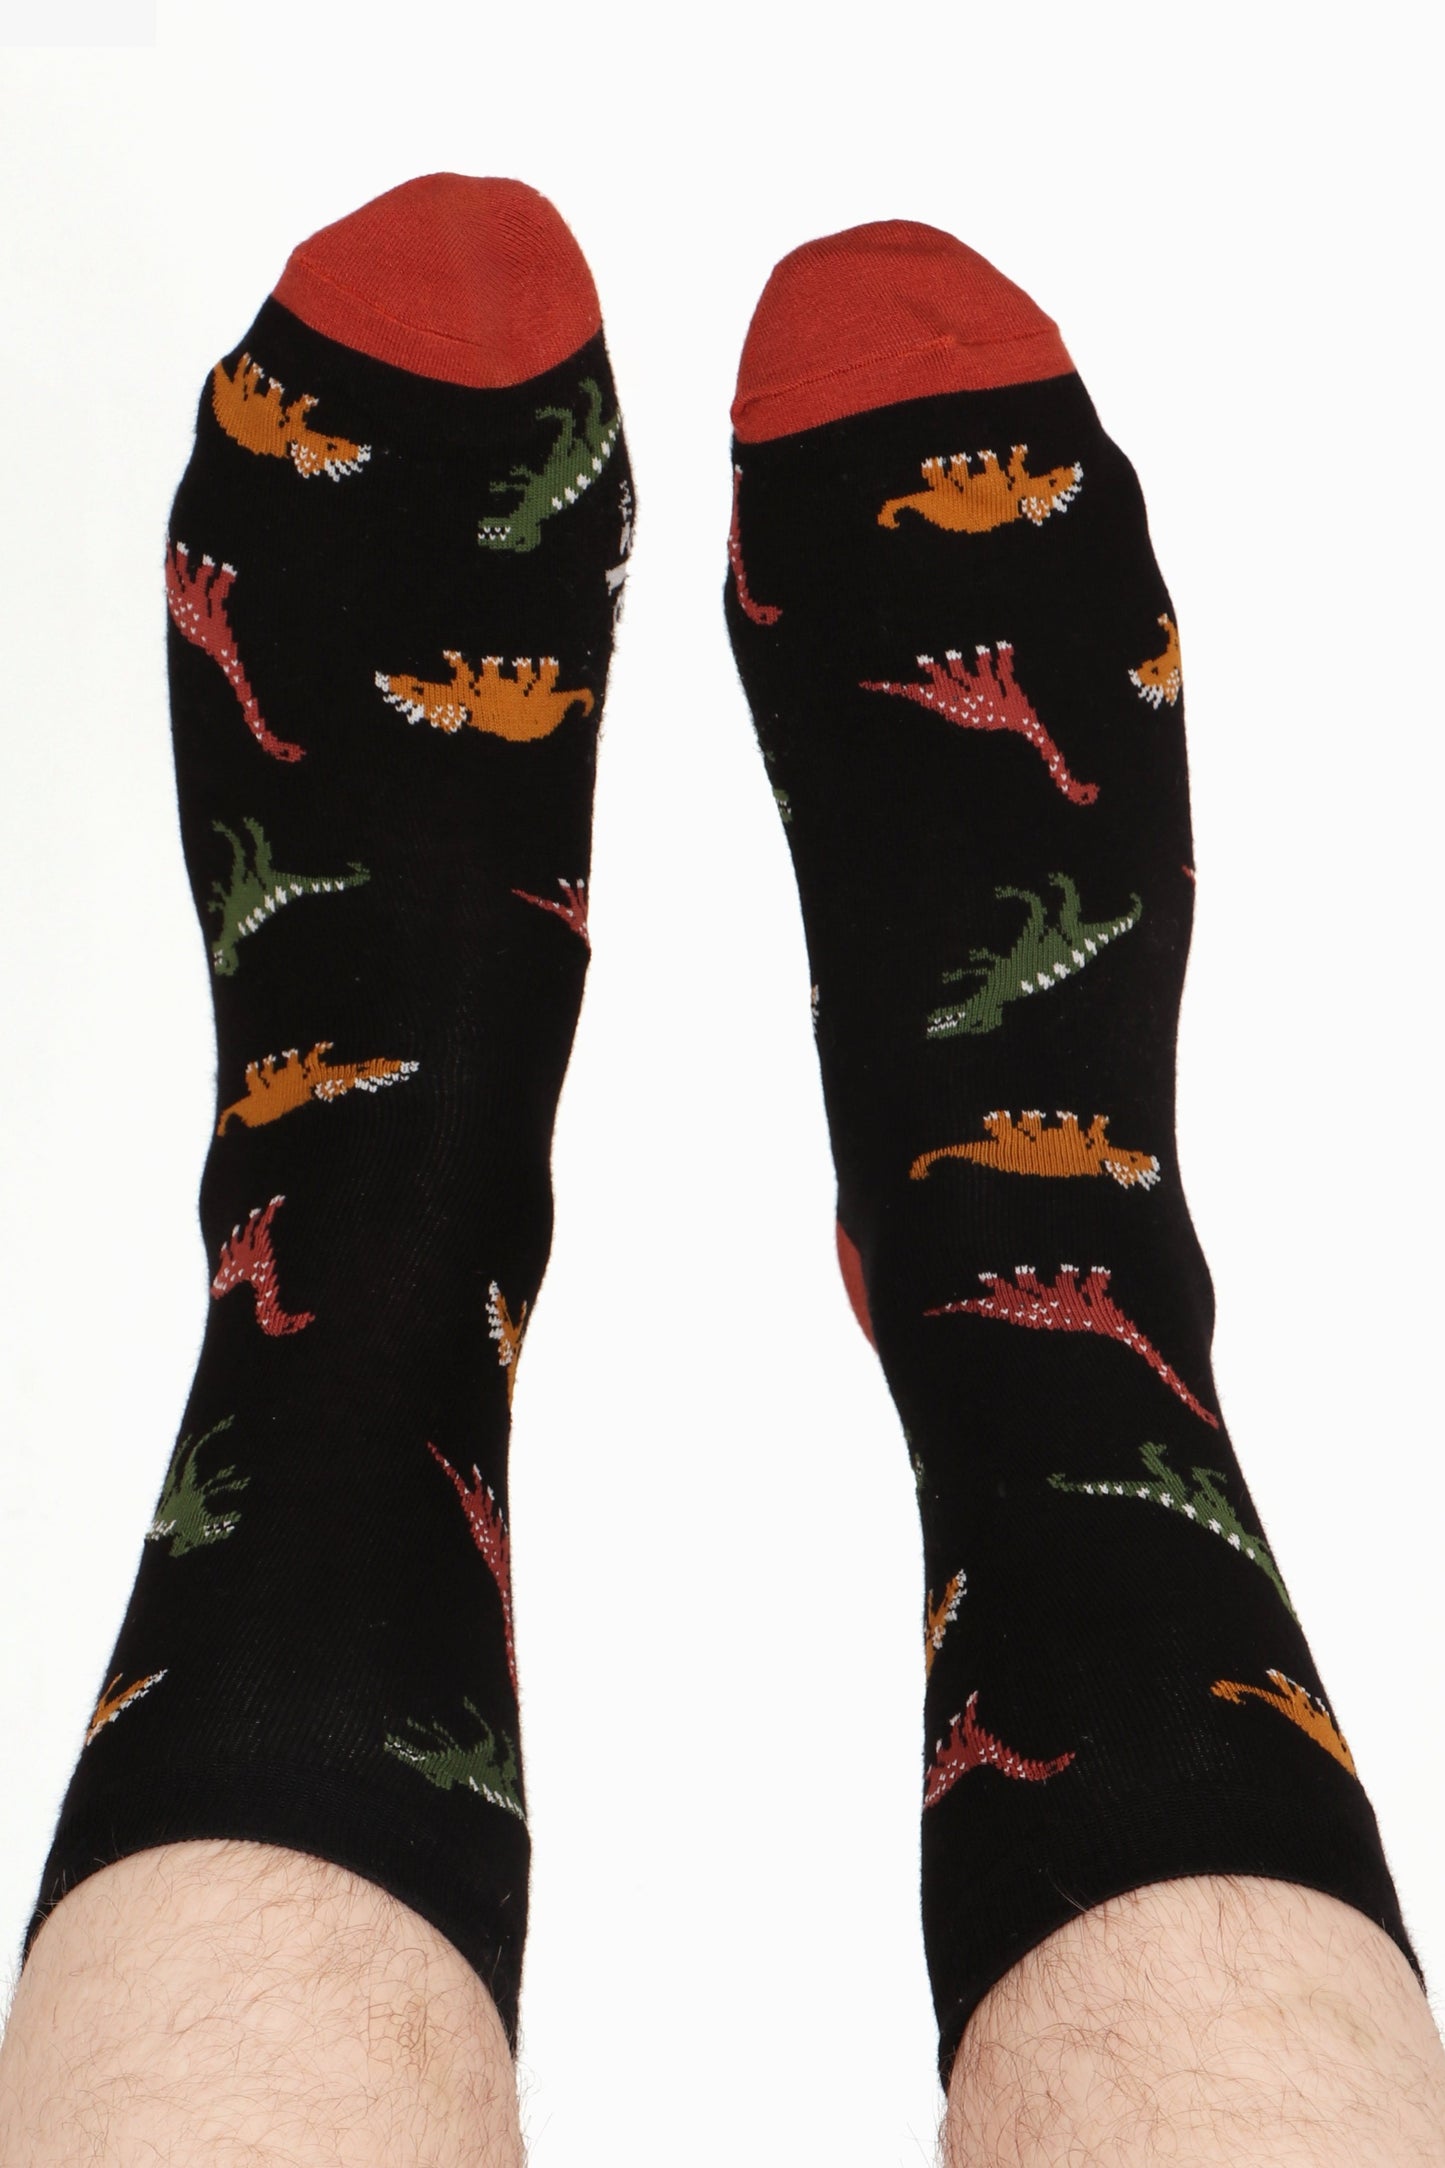 Men's feet in air. Dinosaur print can be seen along with contrasting terracotta tone tone detail